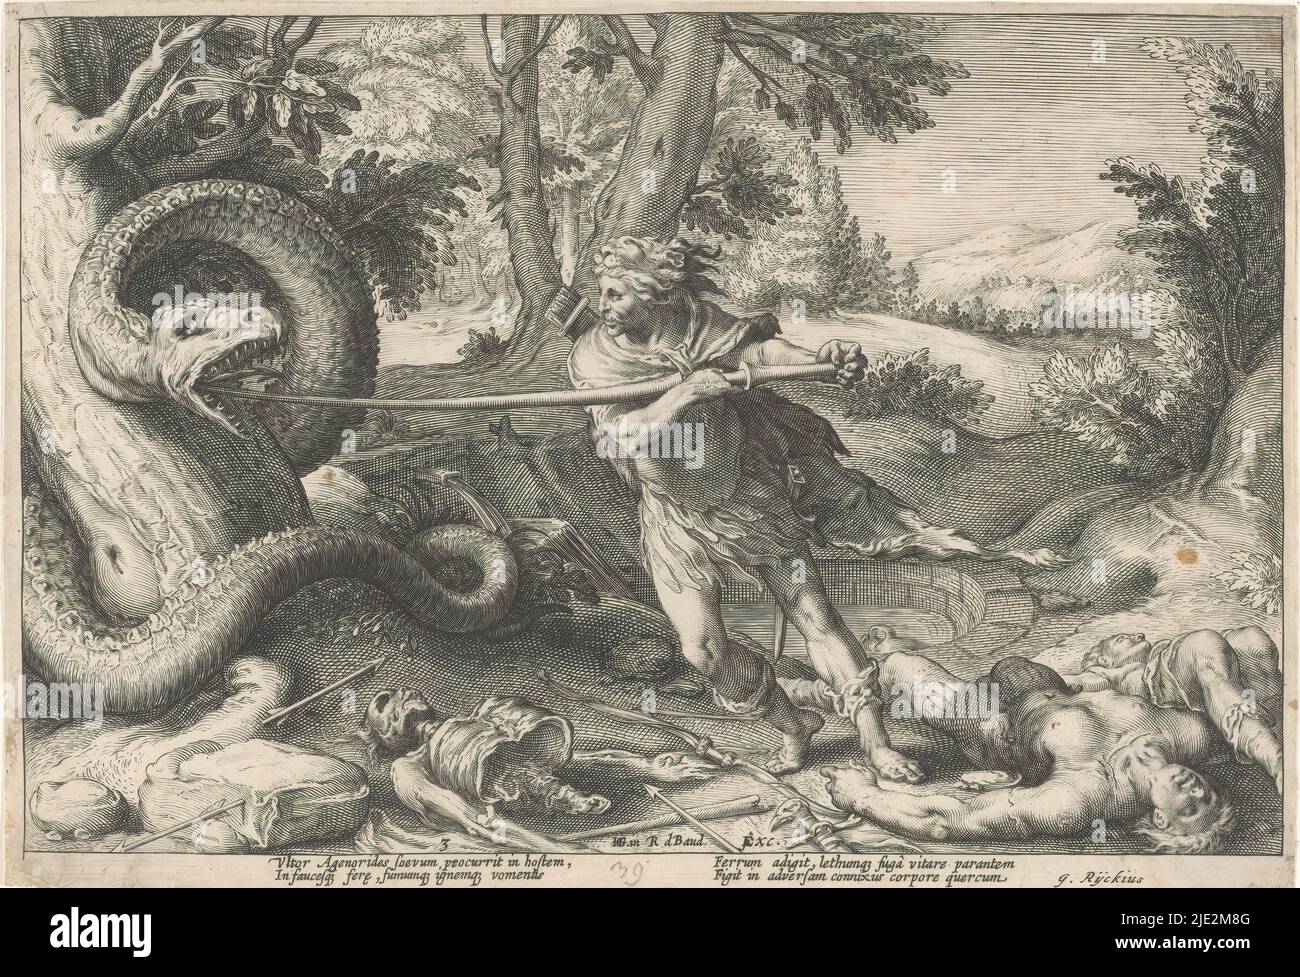 Cadmus slays the dragon, Metamorphoses of Ovid (series title), Cadmus, founder of Thebes, slays the dragon-like serpent that has just devoured his companions. In the lower margin a four-line commentary, in two columns, in Latin., print maker: Hendrick Goltzius, (workshop of), after design by: Hendrick Goltzius, (mentioned on object), G. Rijckius, (mentioned on object), print maker: Haarlem, after design by: Haarlem, publisher: Amsterdam, c. 1590 and/or 1615, paper, engraving, height 176 mm × width 256 mm Stock Photo